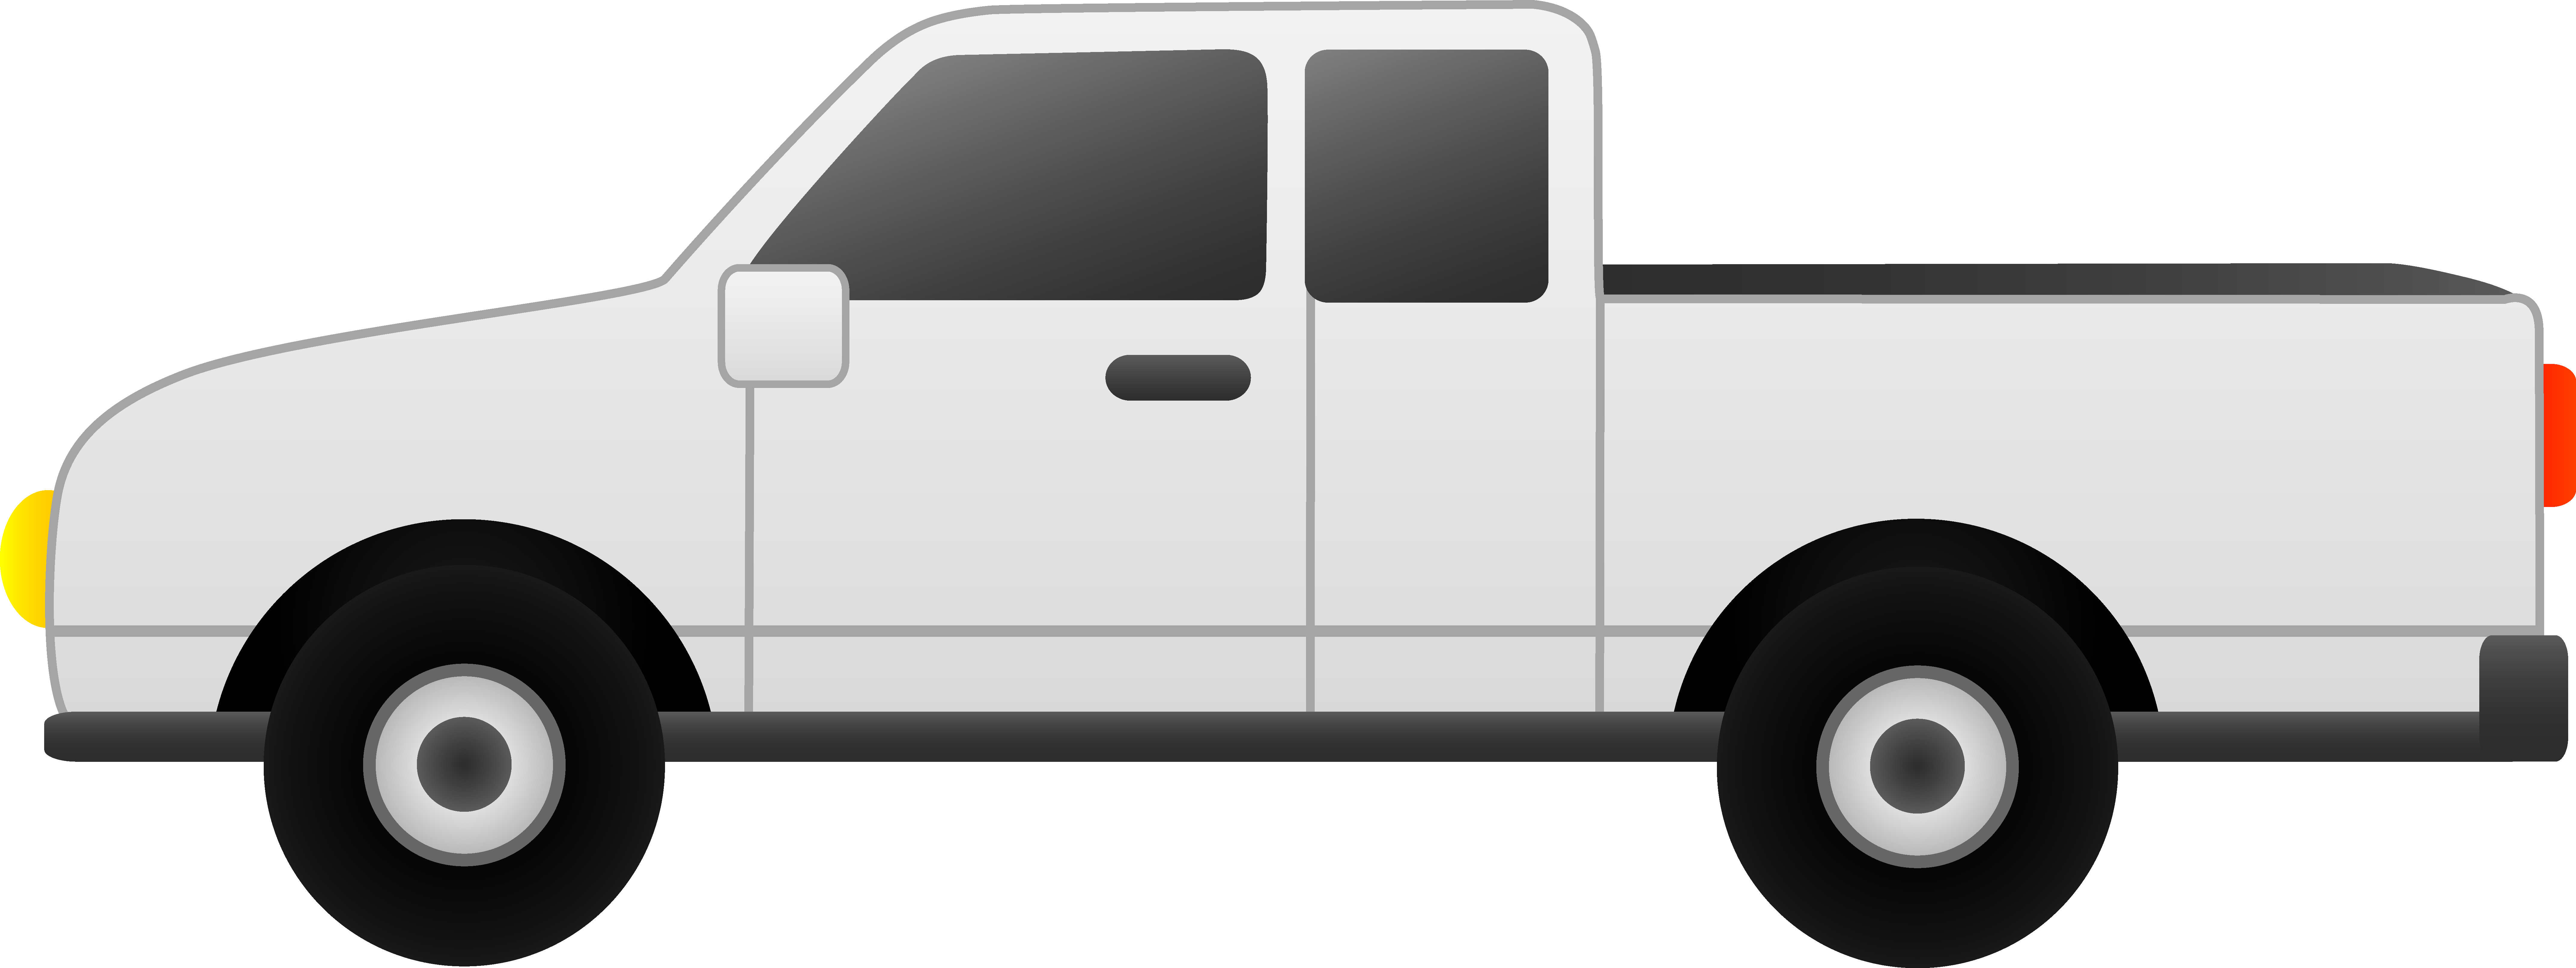 Pick Up Truck Clipart Top View | Clipart Panda - Free Clipart Images